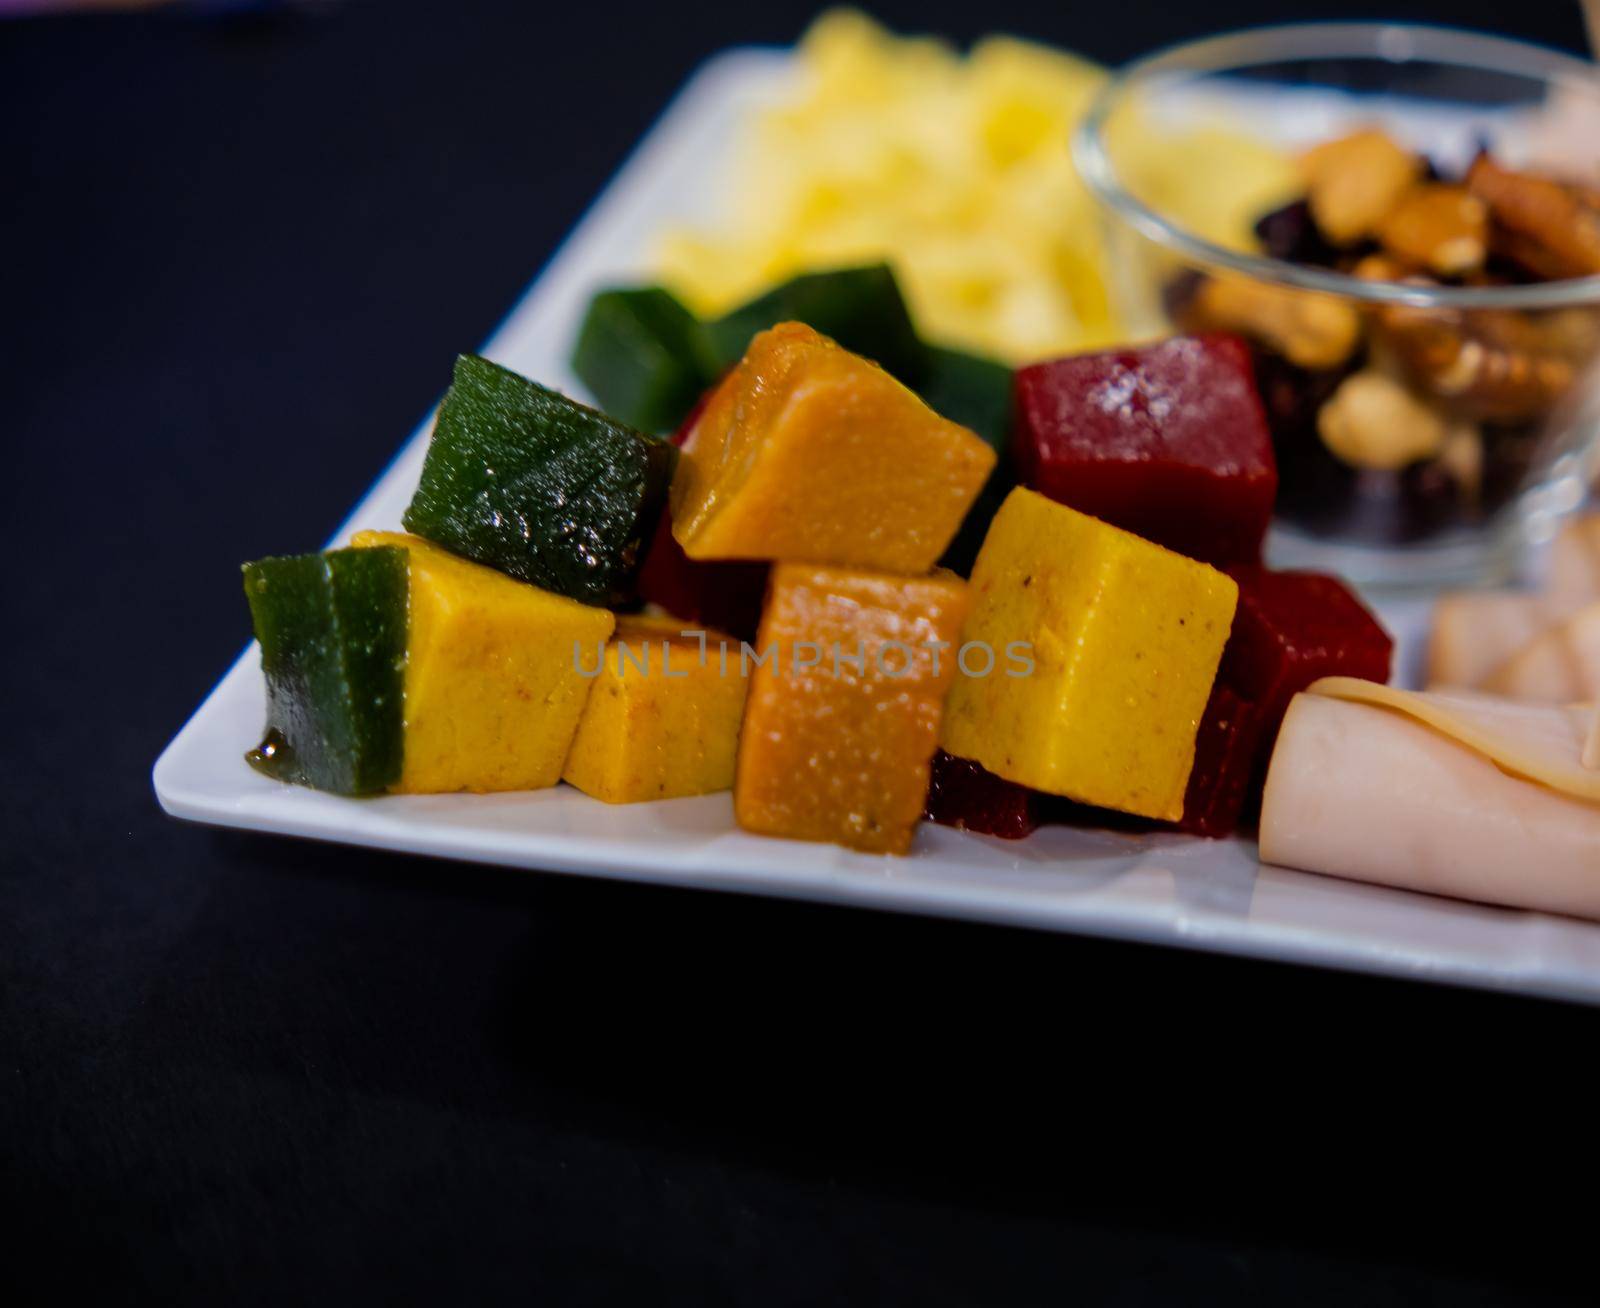 Close-up of diced fruit paste, turkey ham rolls, cheddar cheese cubes, and glass of walnuts on square white plate. Turkey meat, colorful Mexican candy, and nuts above black surface. Healthy snacks